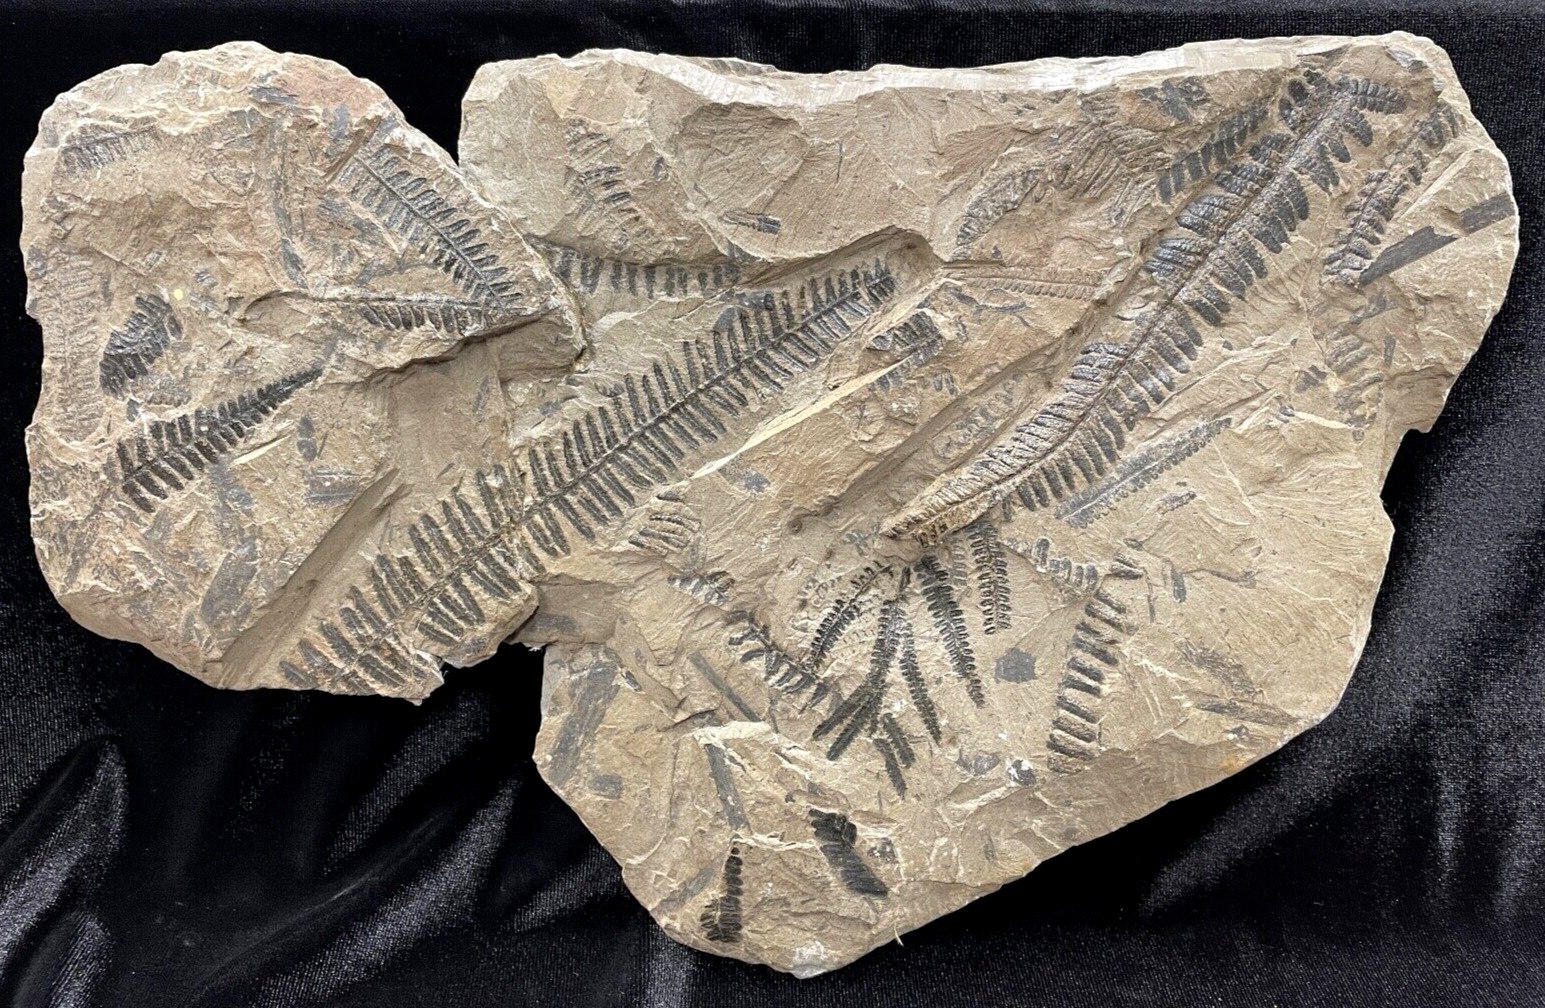 Massive Pecopteris Fossil Plate, Germany